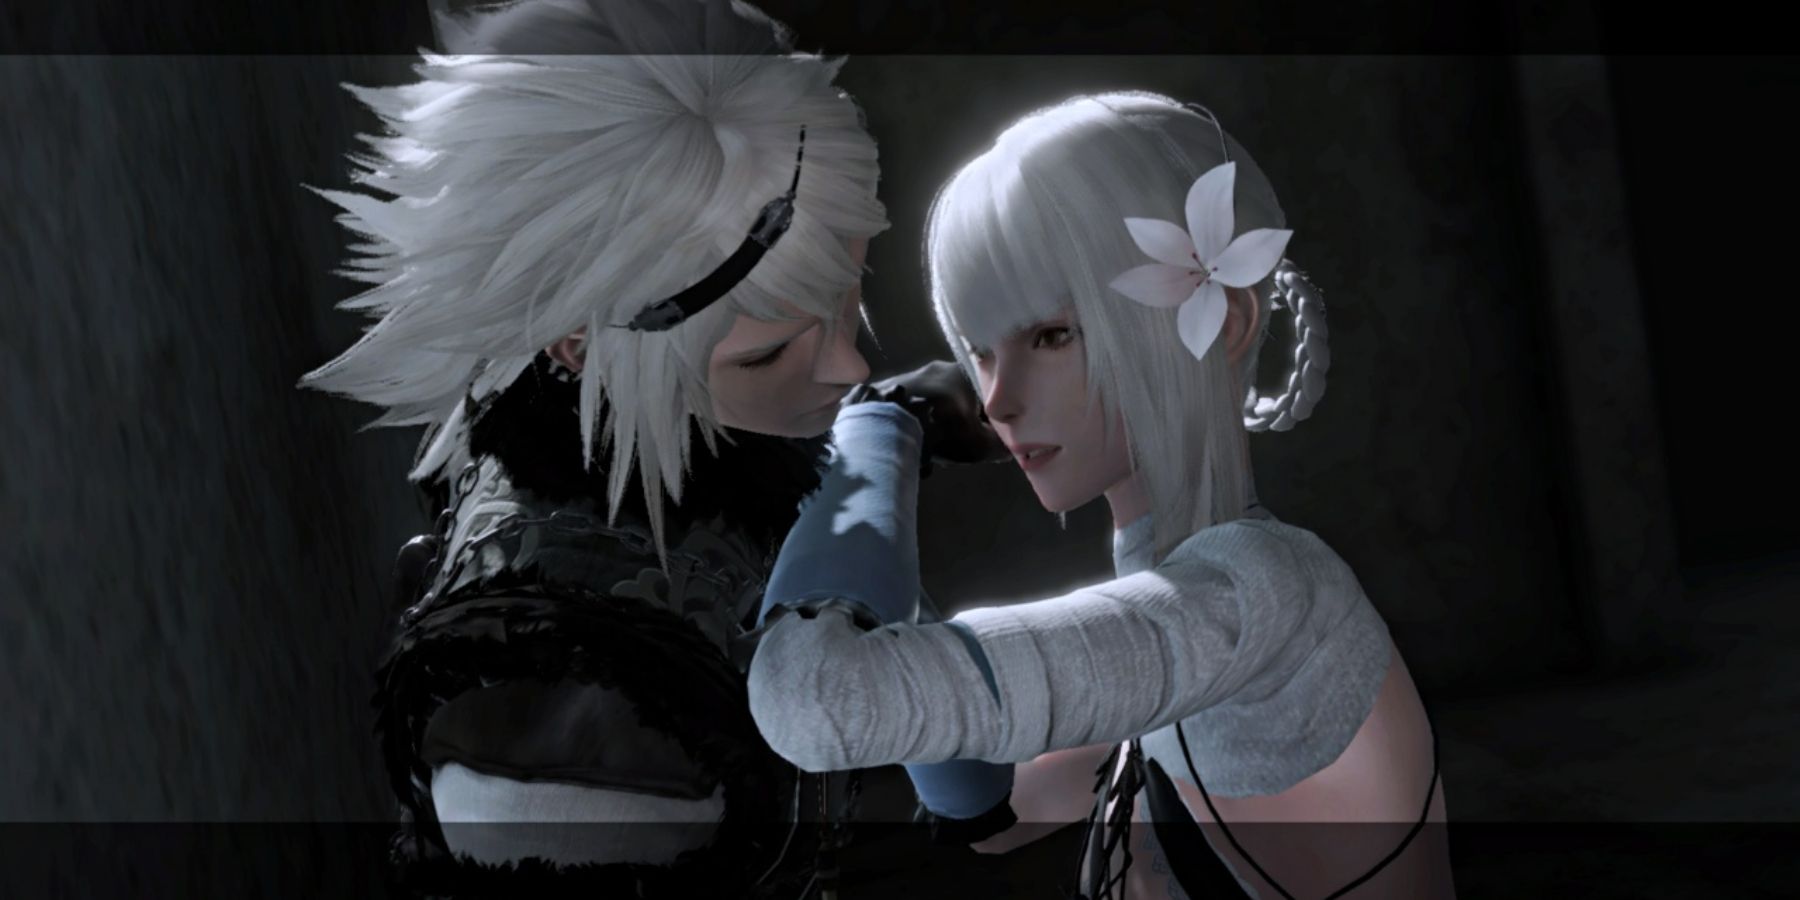 Nier and Kaine in NieR Replicant